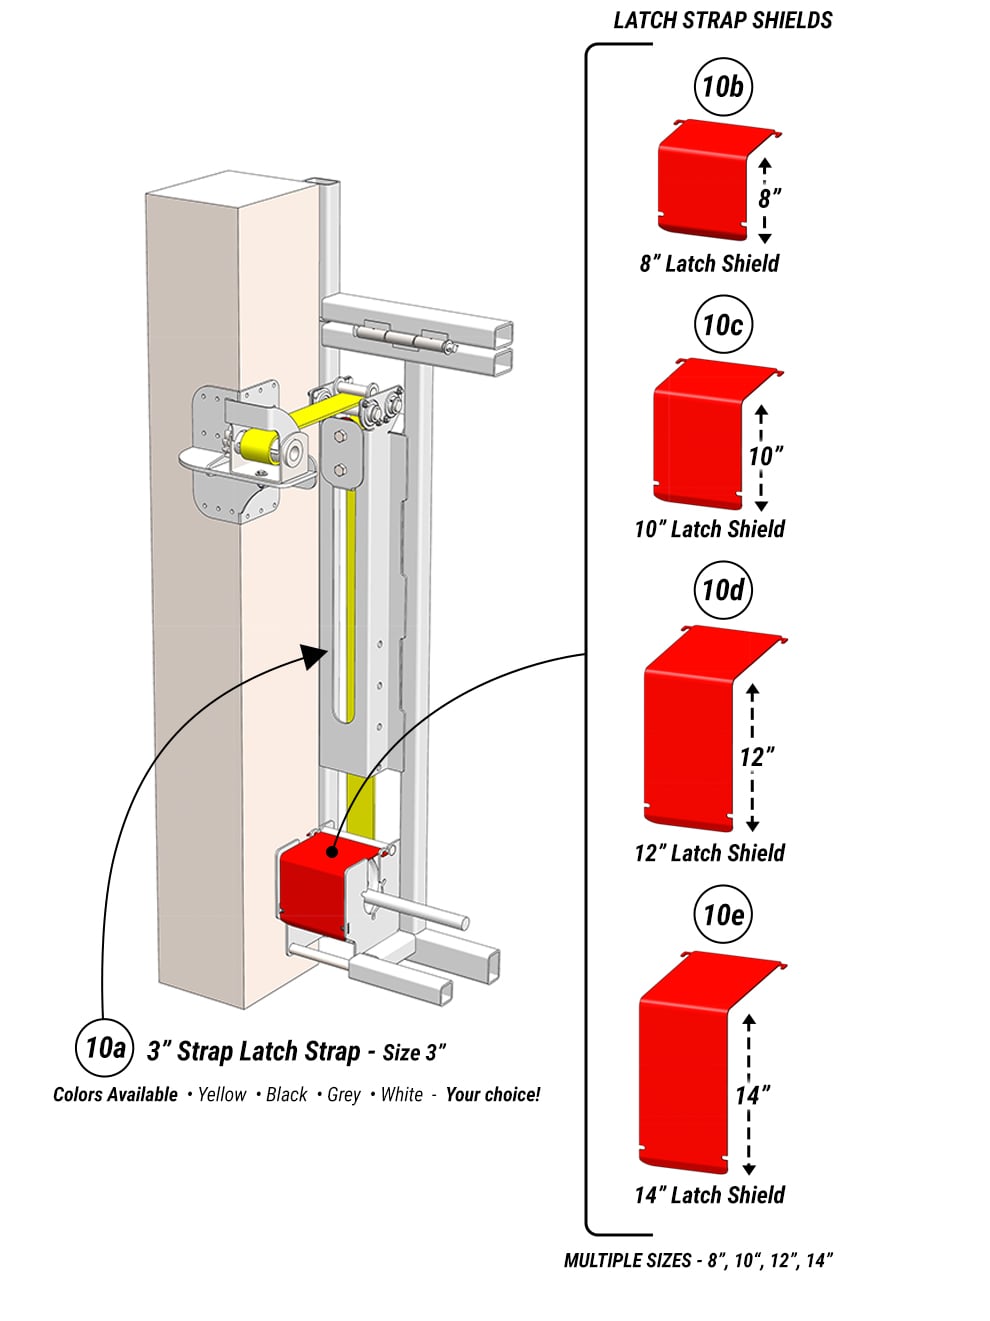 Latch Strap System for your Straplift engineered doors